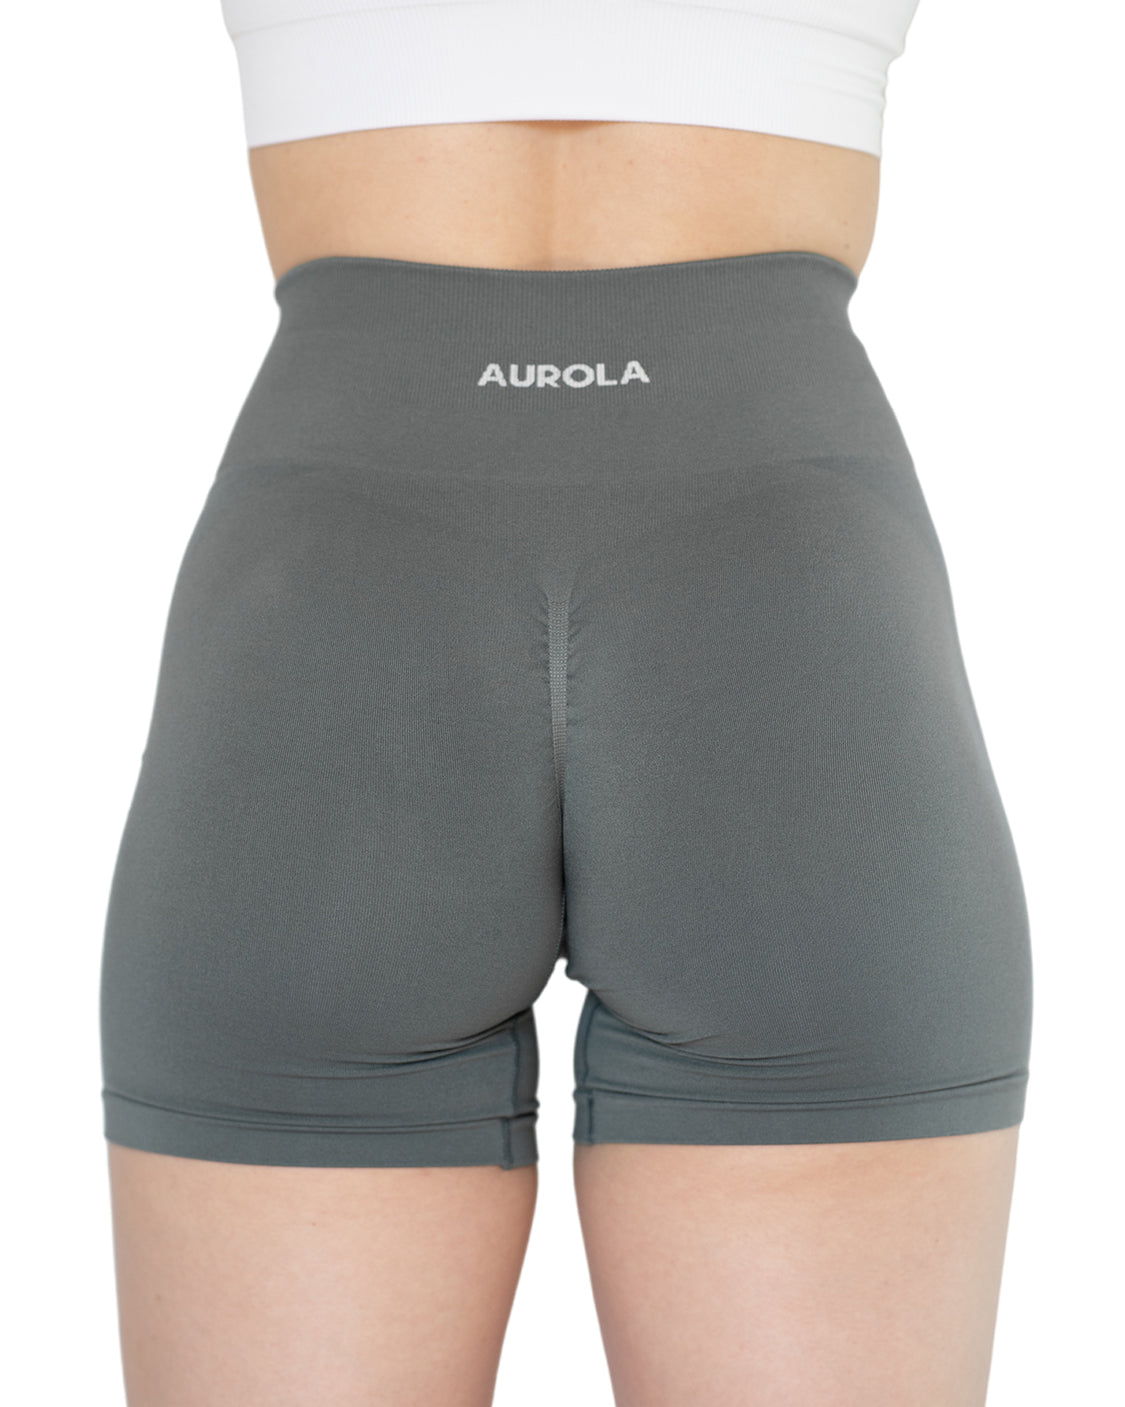 Buy AUROLA Intensify Workout Shorts for Women Seamless Scrunch Short Gym  Yoga Running Sport Active Exercise Fitness Shorts, Cork, X-Small at